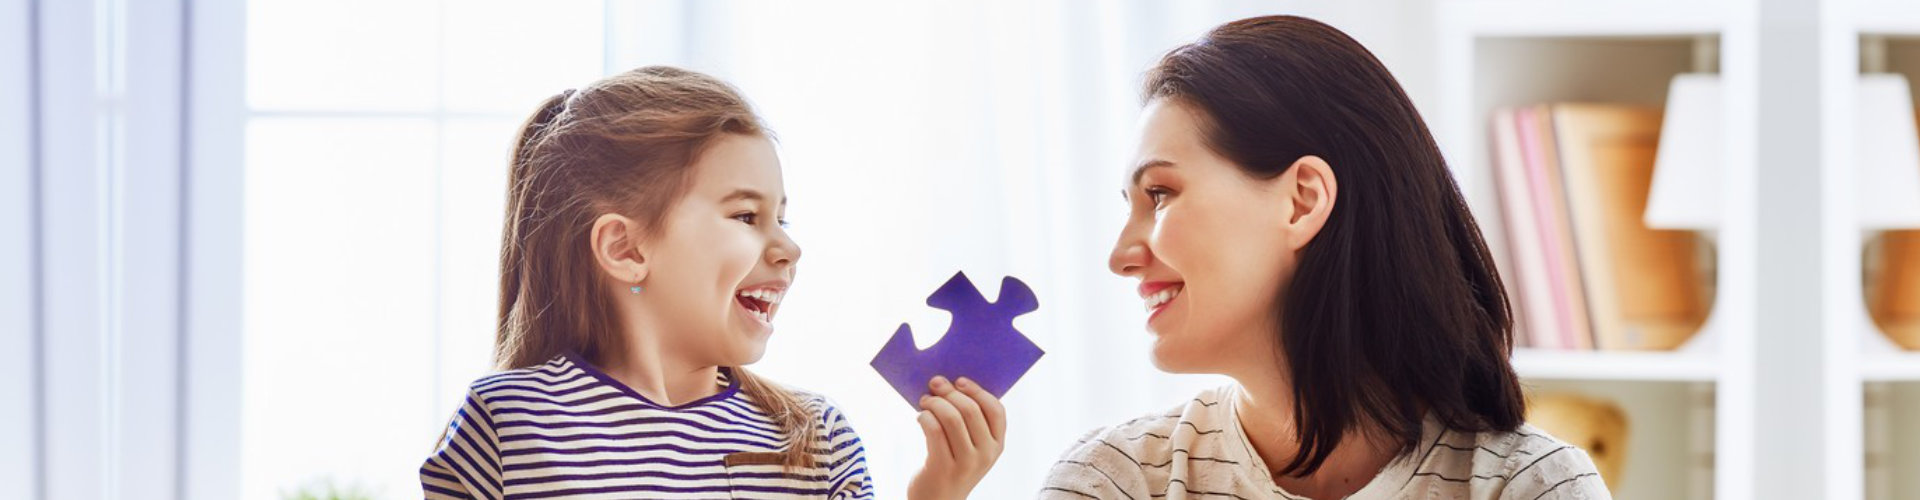 girl smiling and holding a puzzle piece while looking at her mom